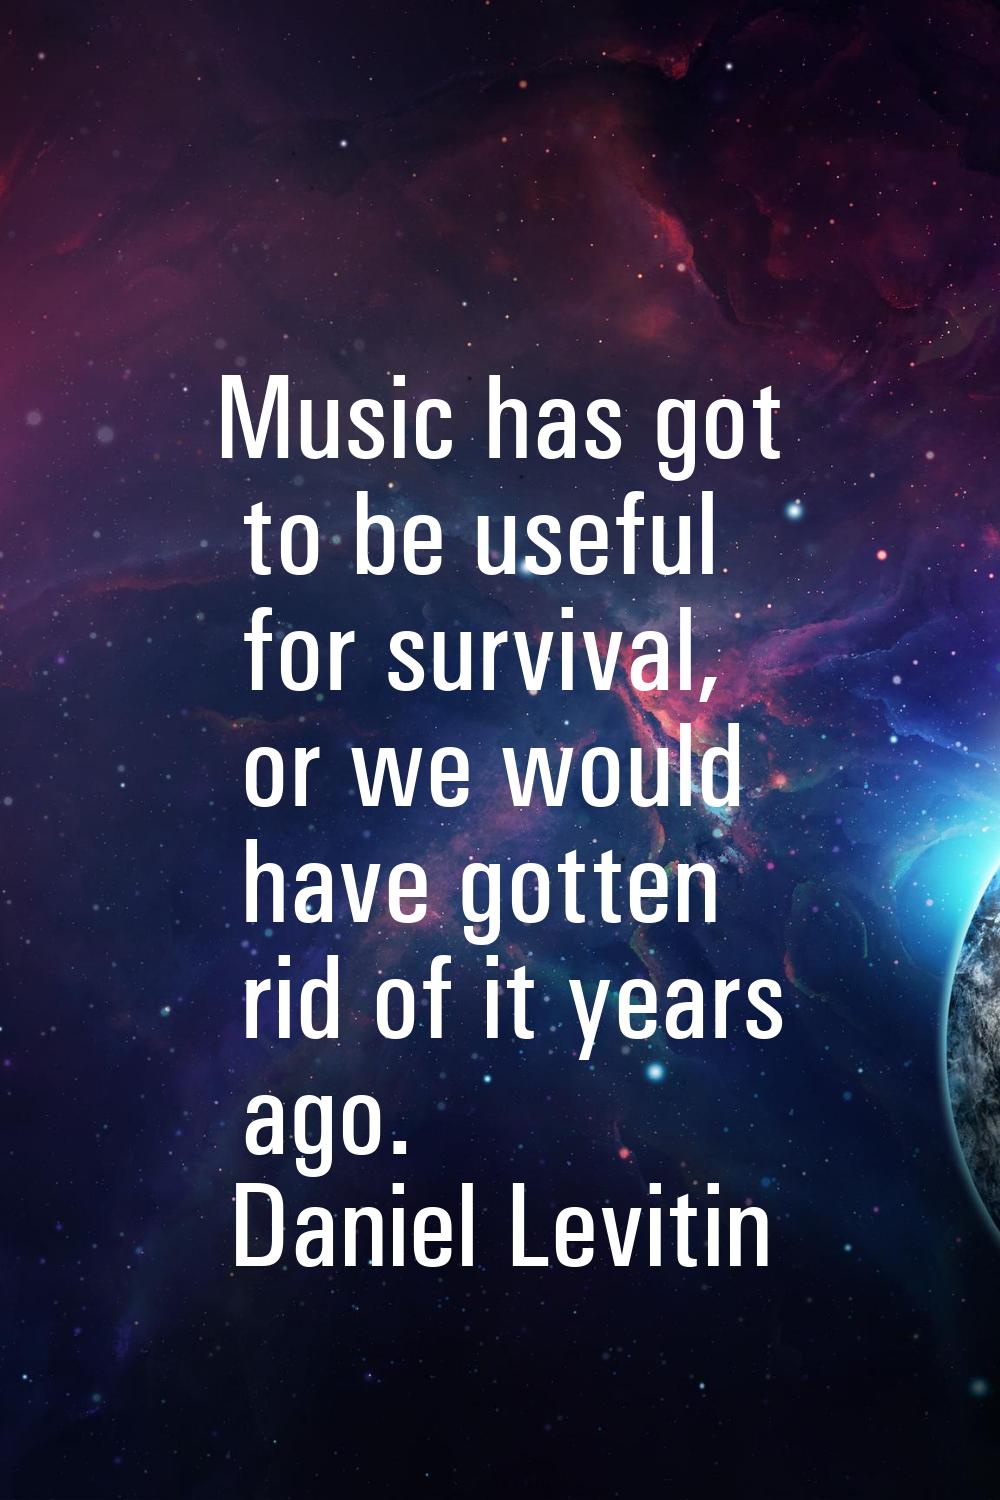 Music has got to be useful for survival, or we would have gotten rid of it years ago.